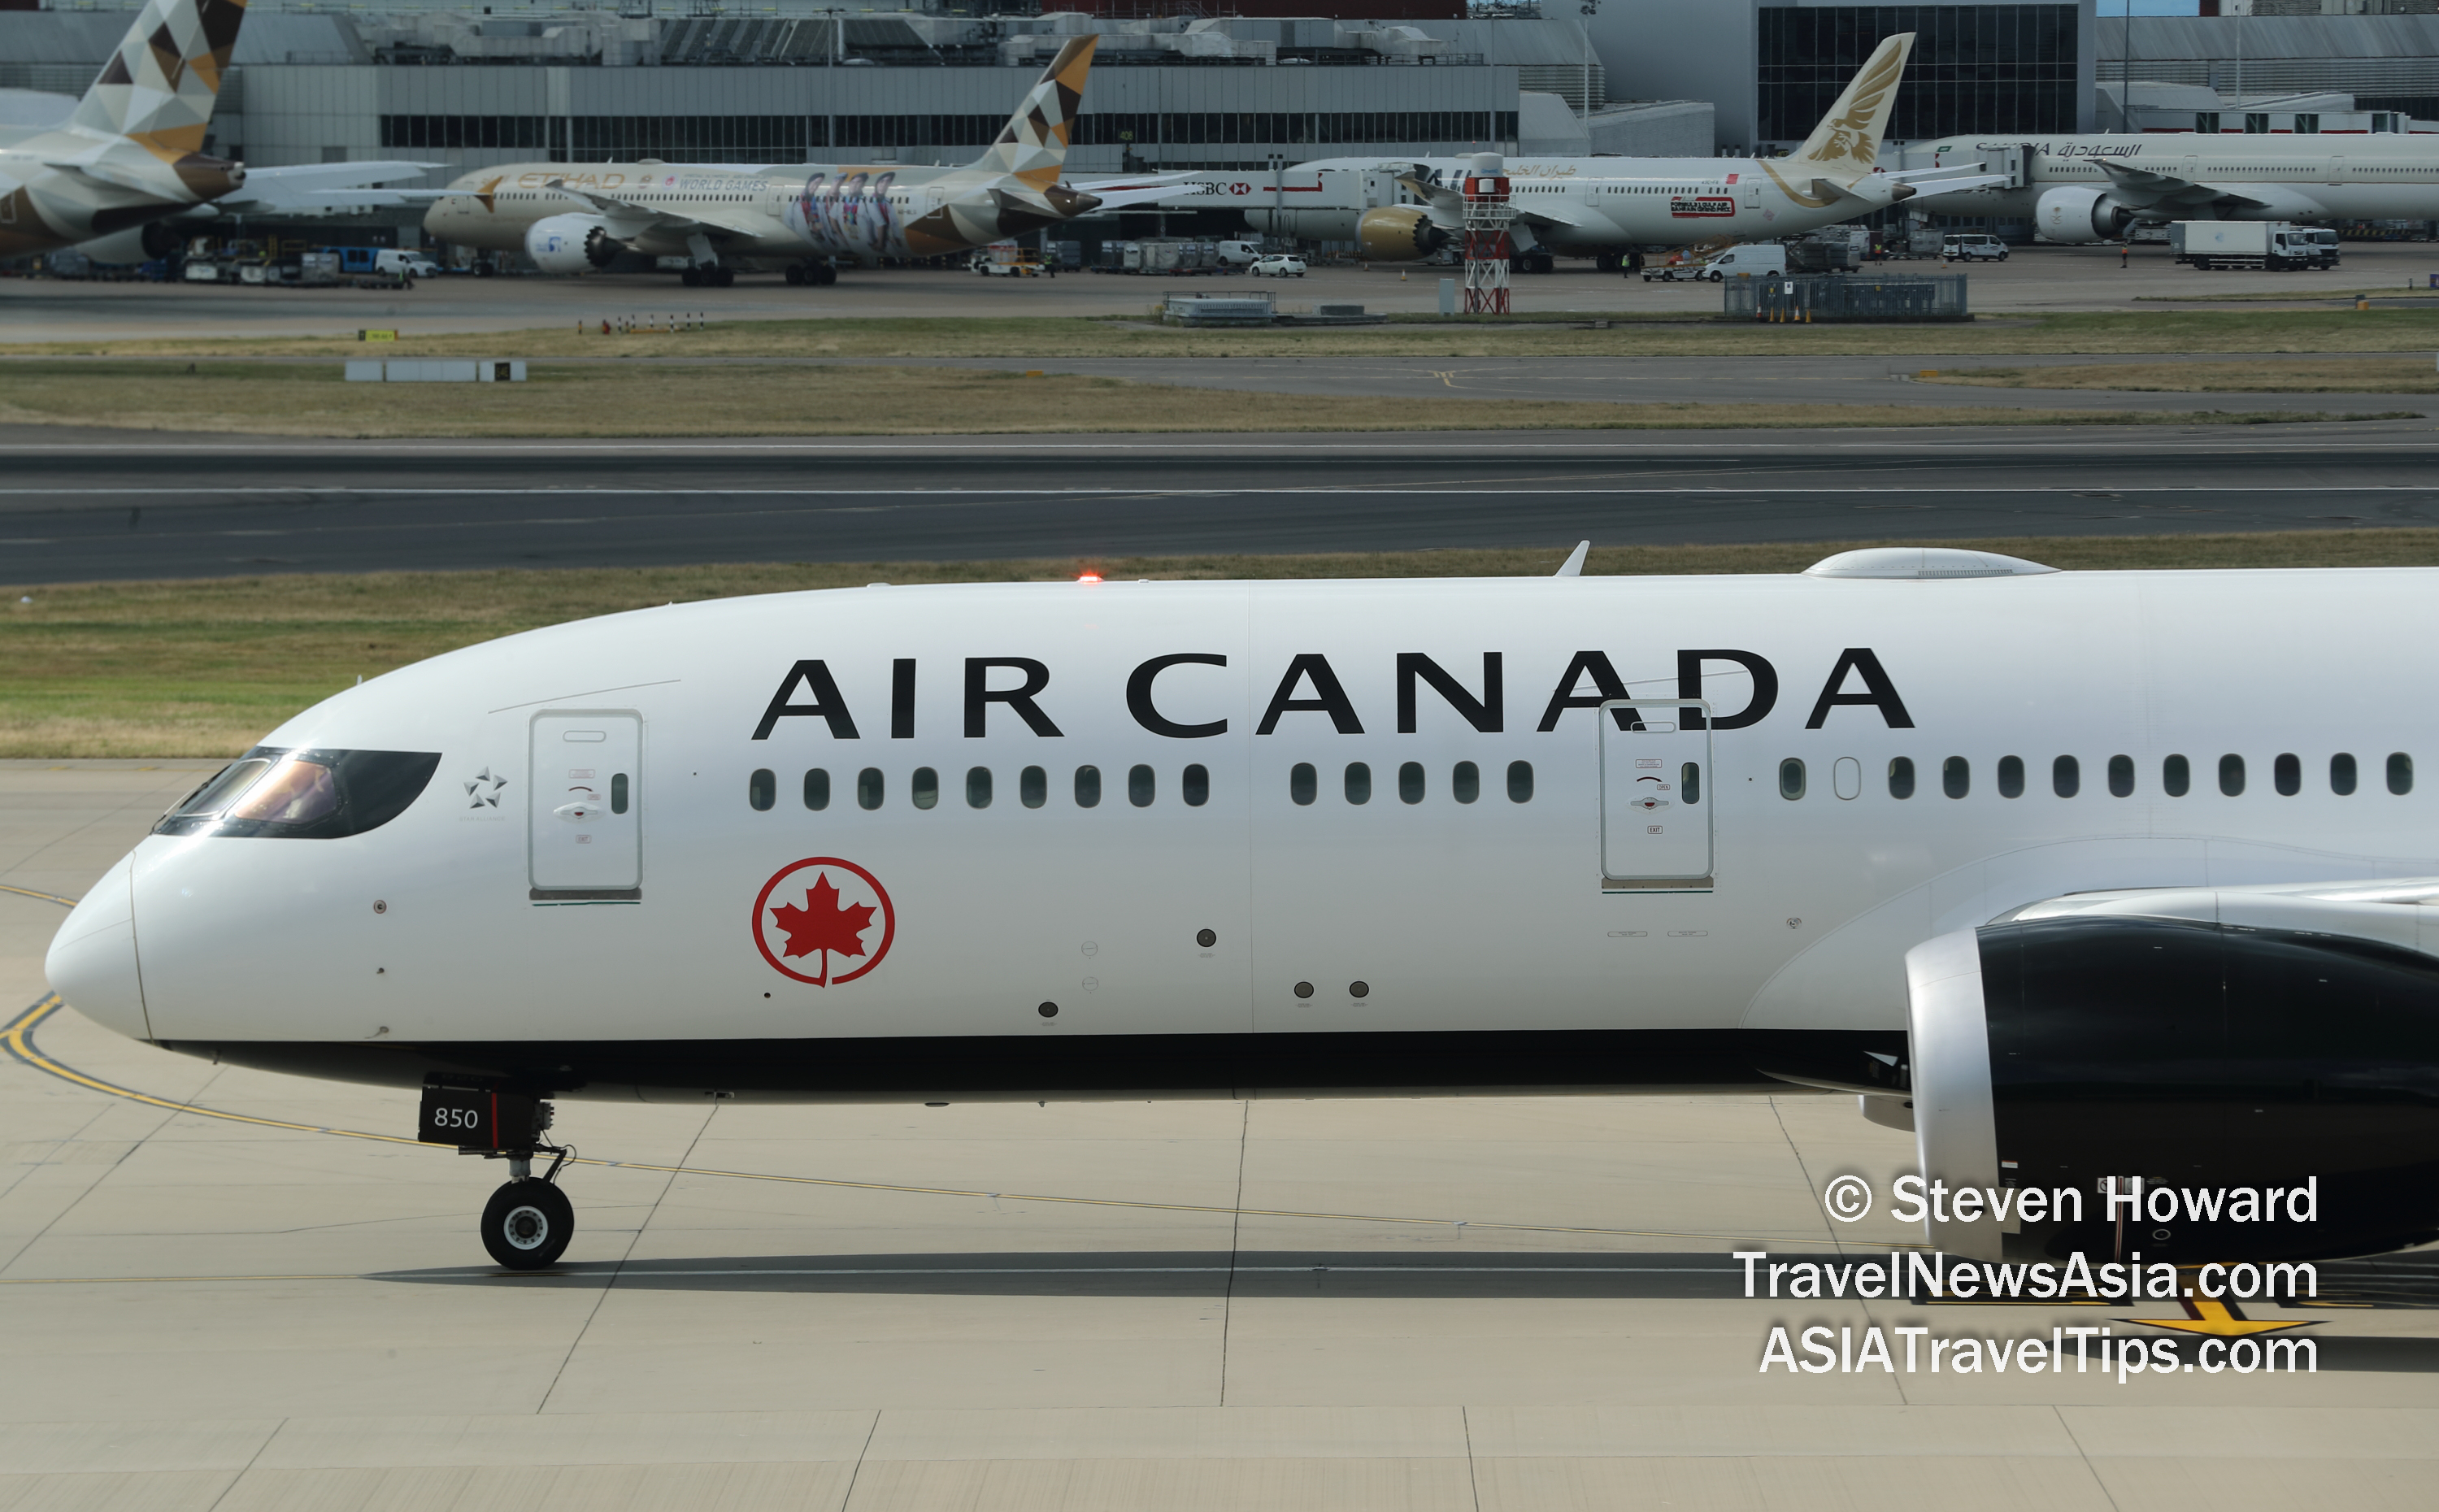 Air Canada Boeing 787-8 reg: C-FRTU. Picture by Steven Howard of TravelNewsAsia.com Click to enlarge.